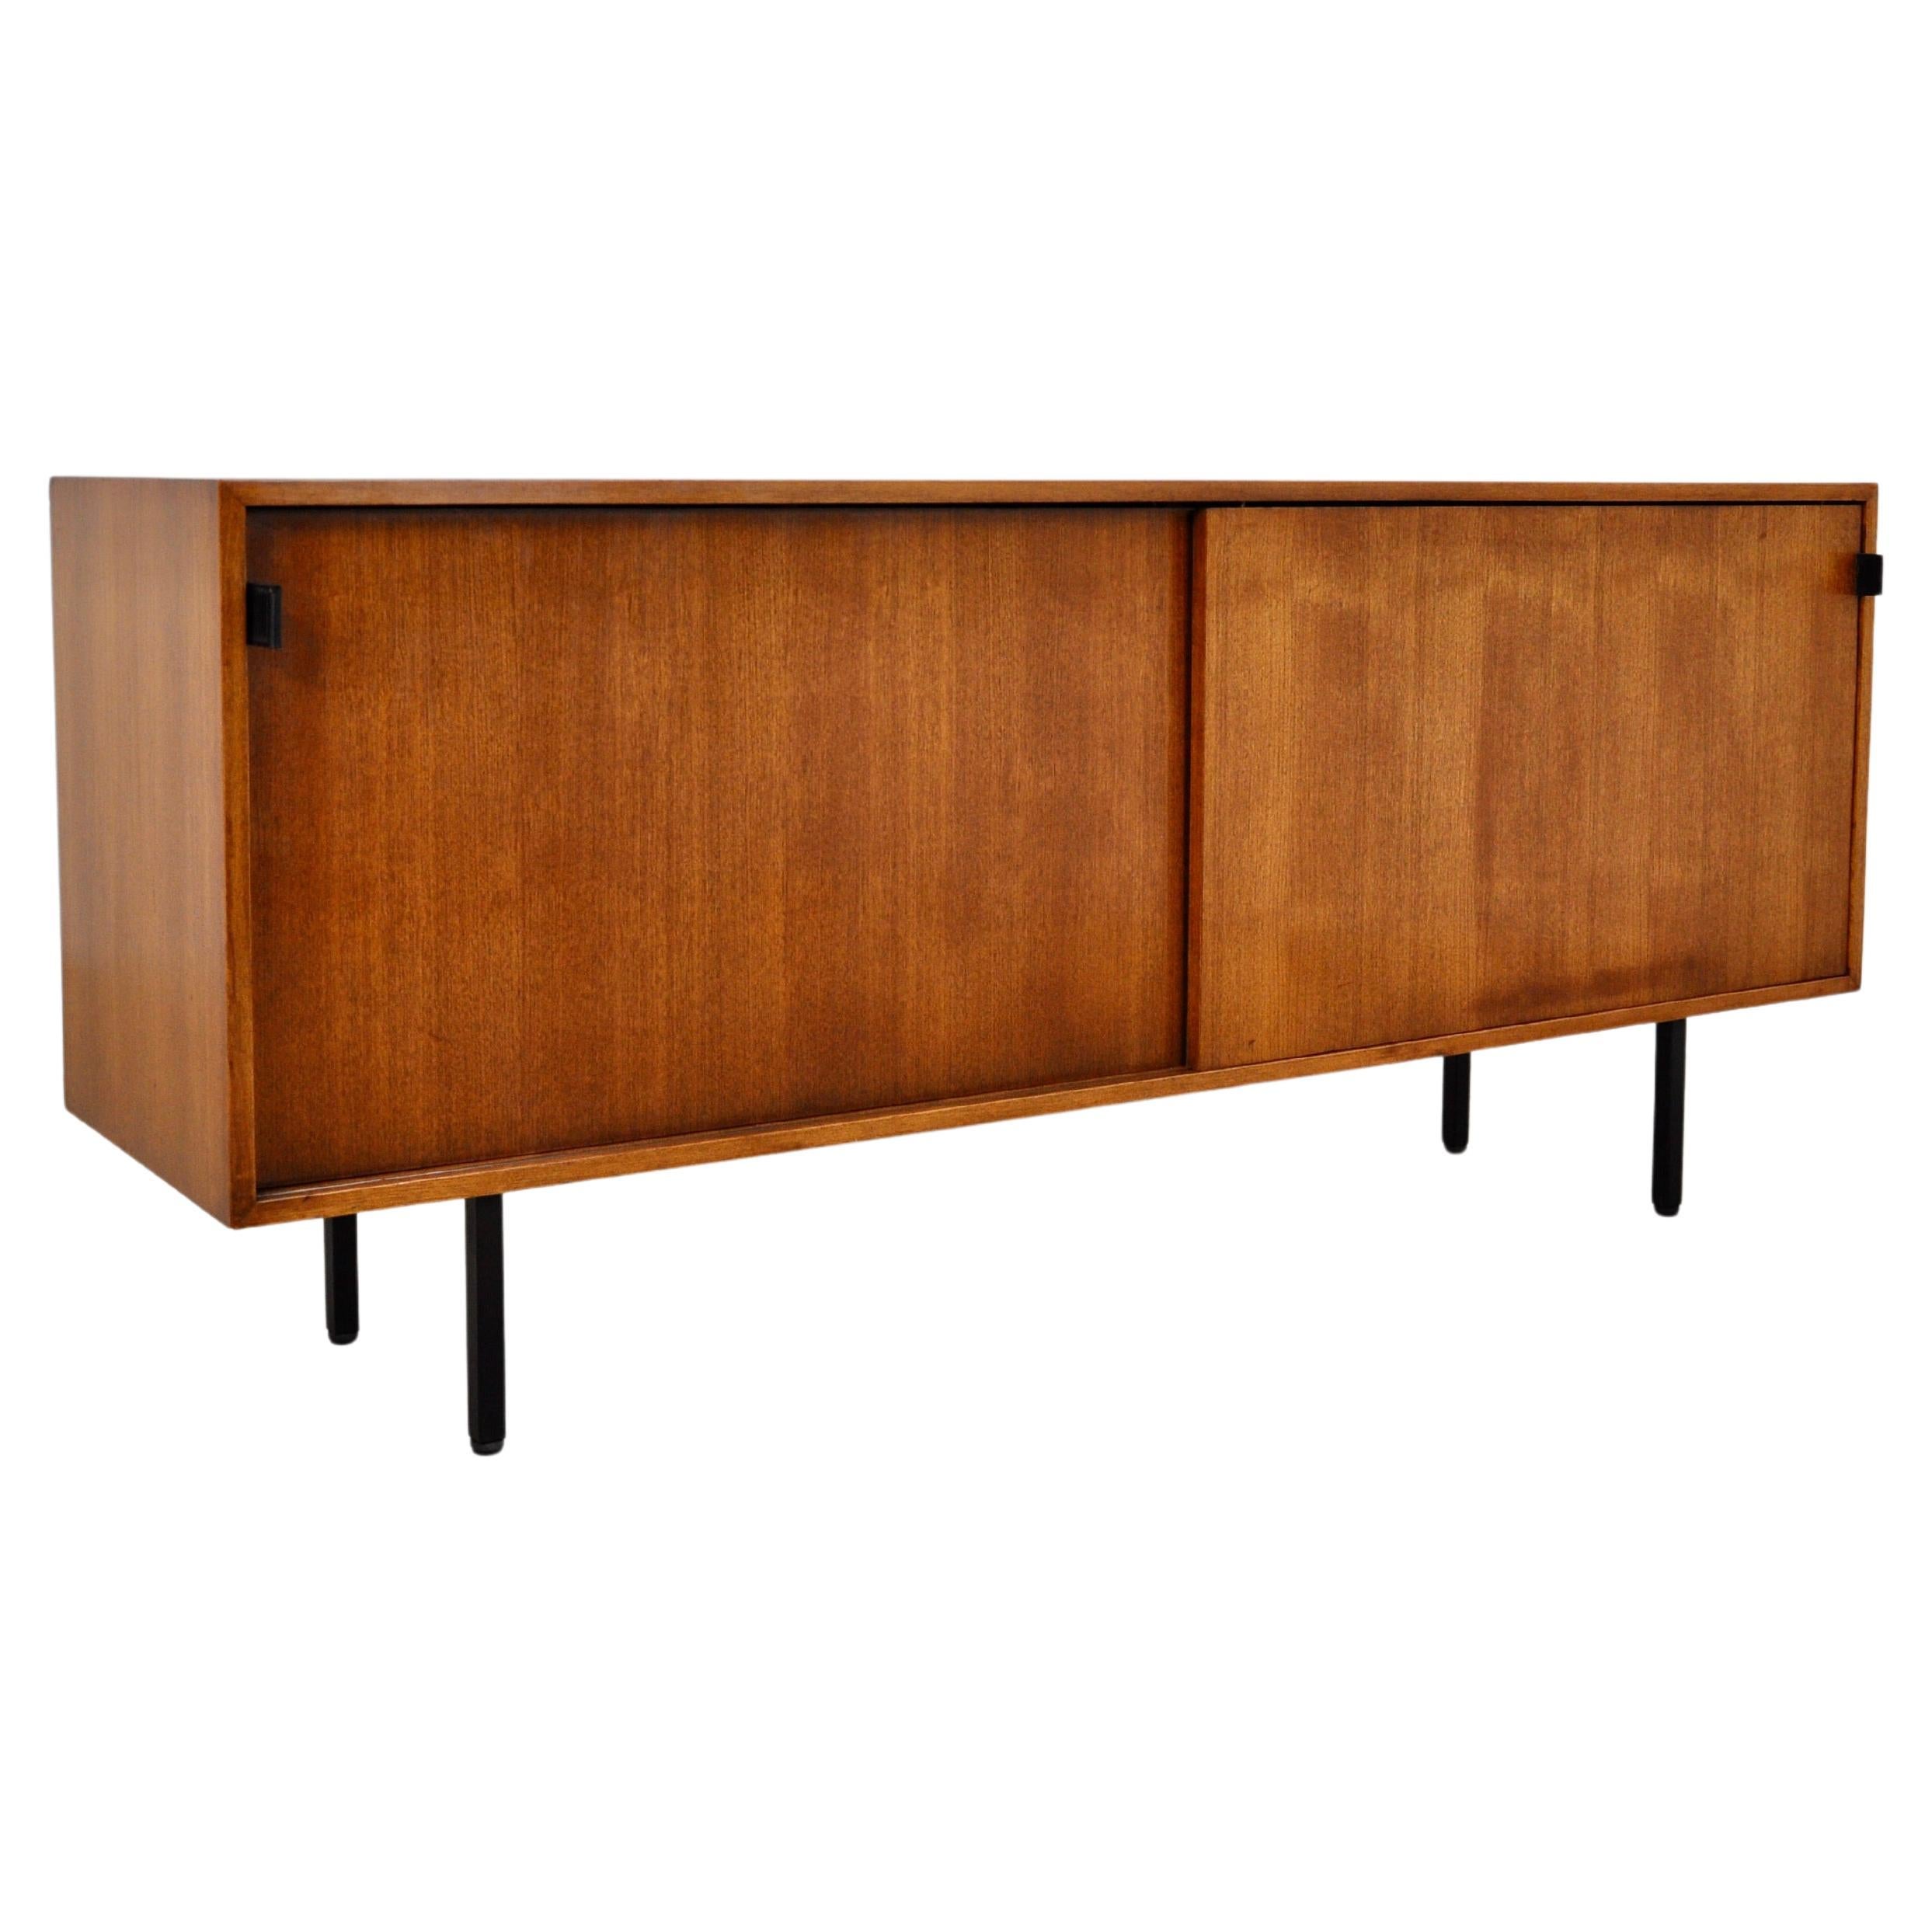 Sideboard by Florence Knoll Bassett for Knoll Inc, 1960s